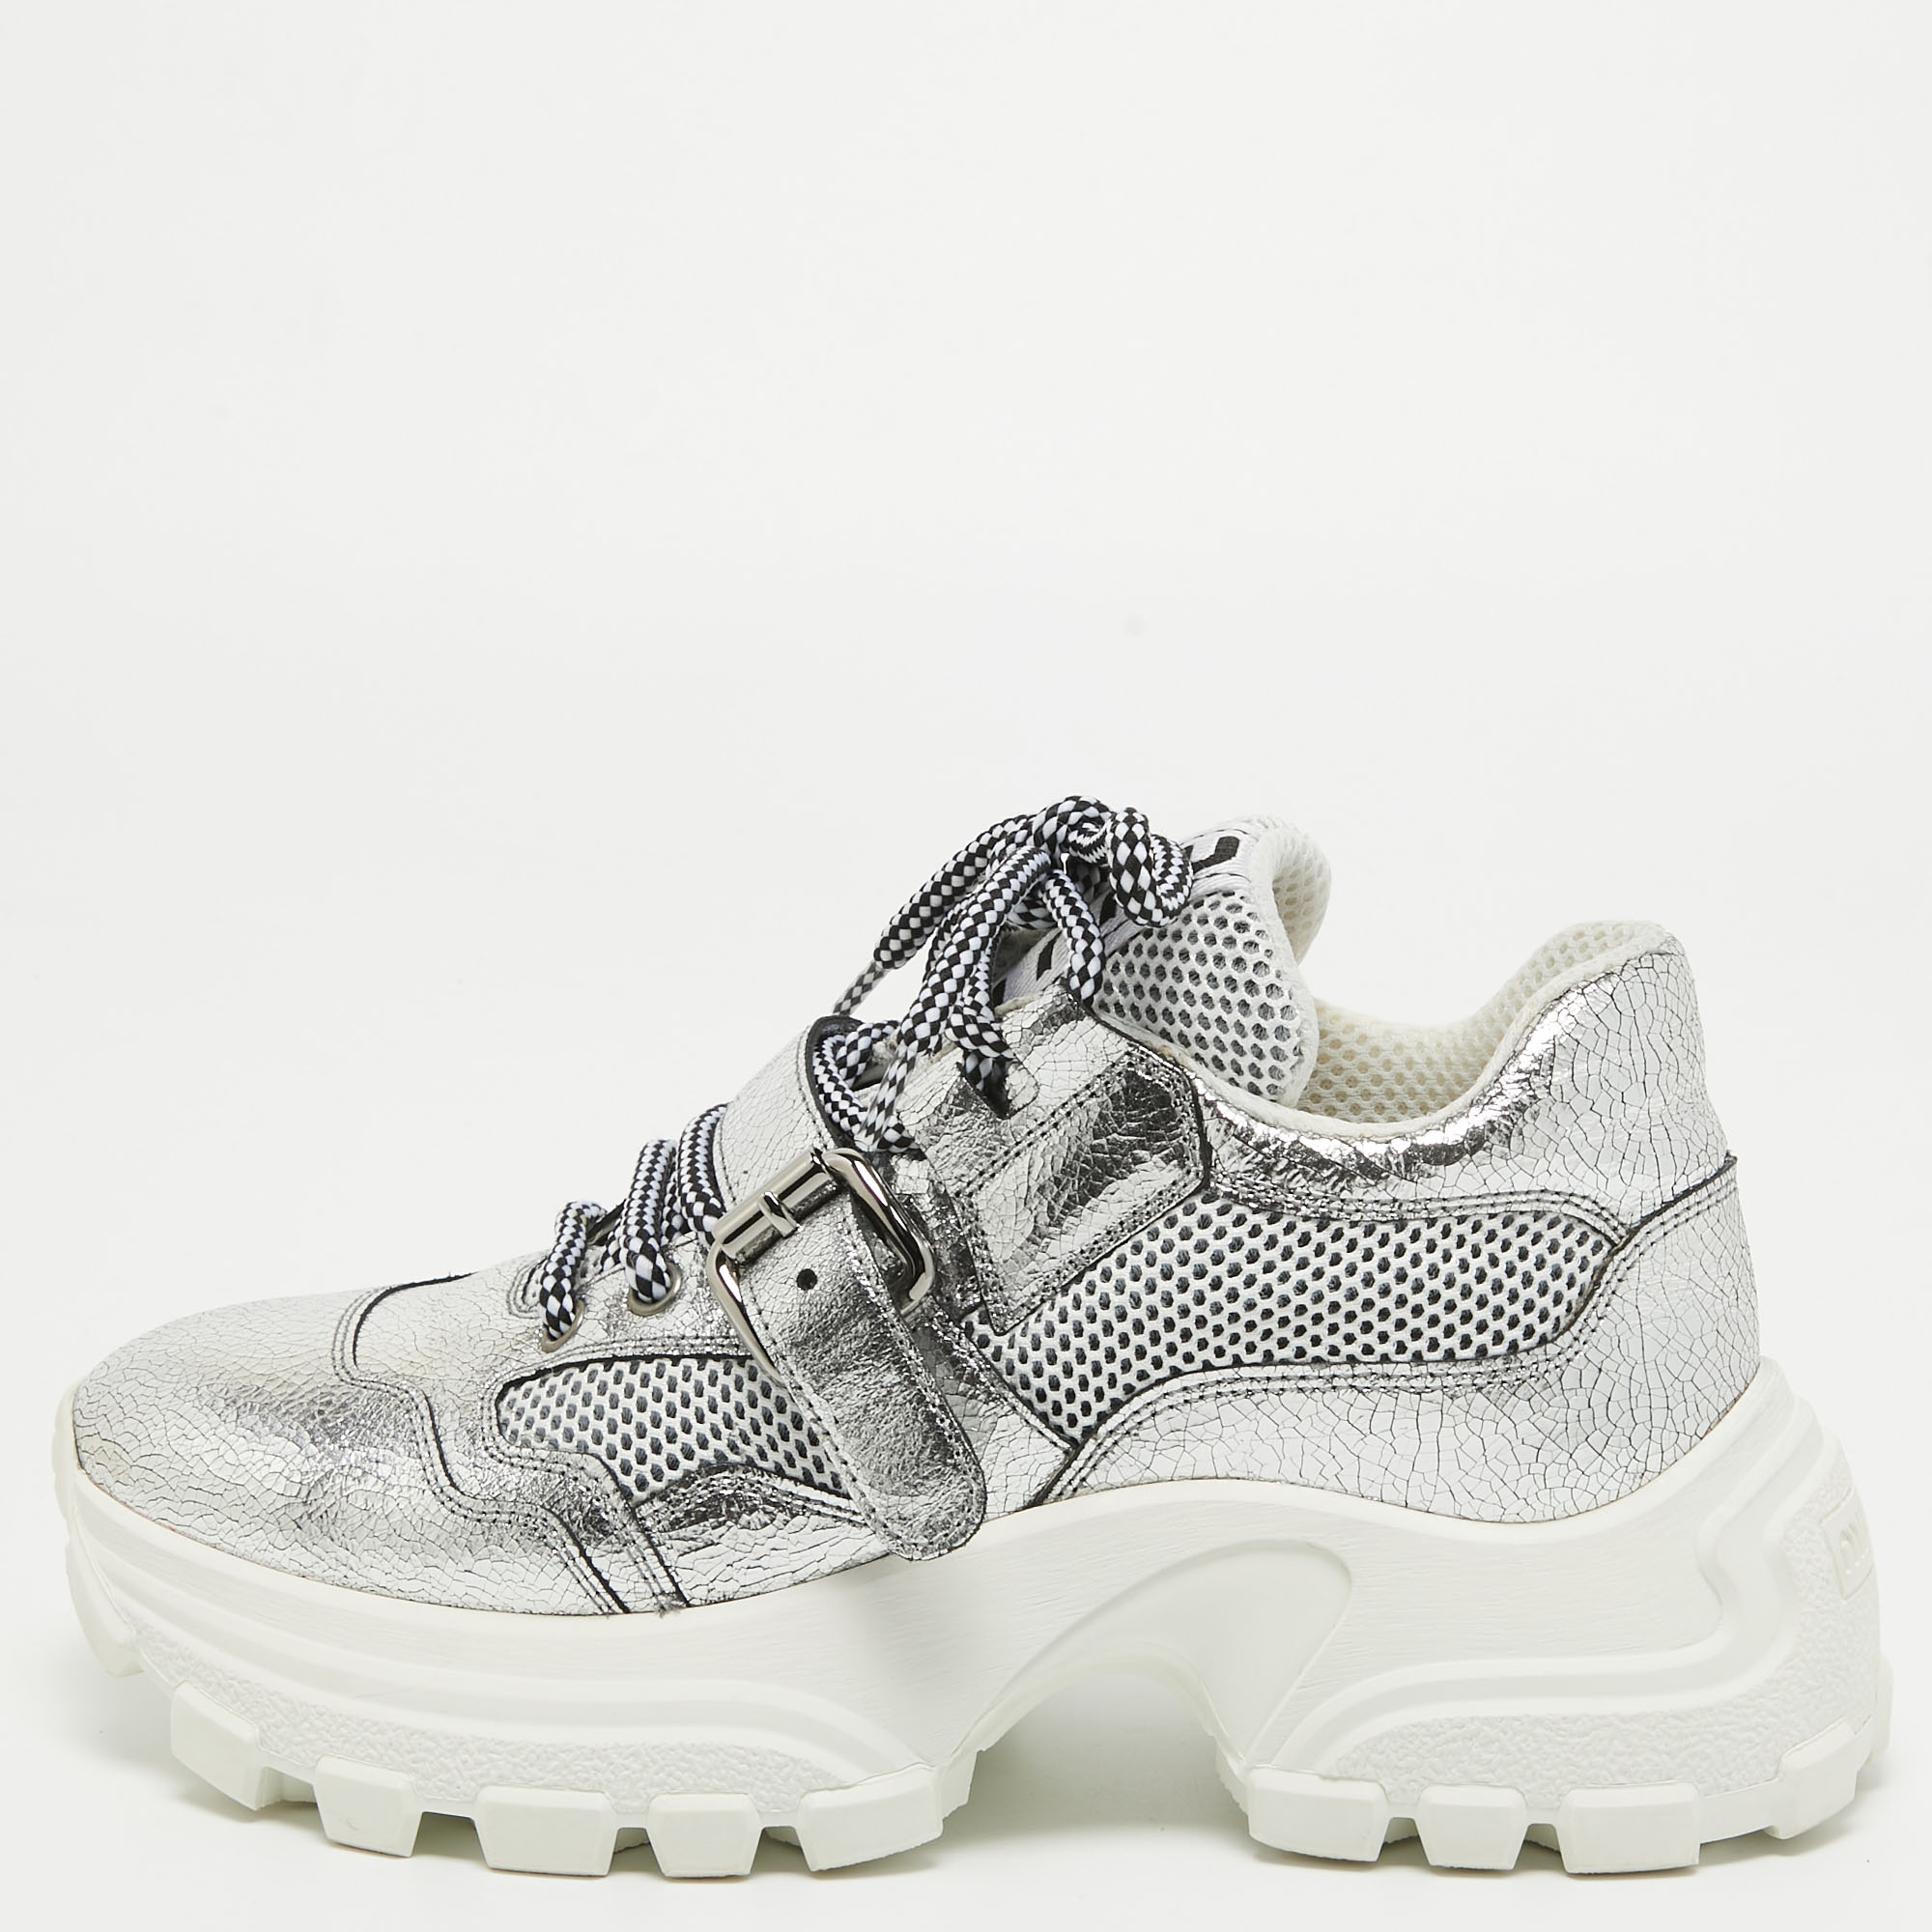 Miu Miu Silver Texture Leather Lace Up Sneakers Size 38